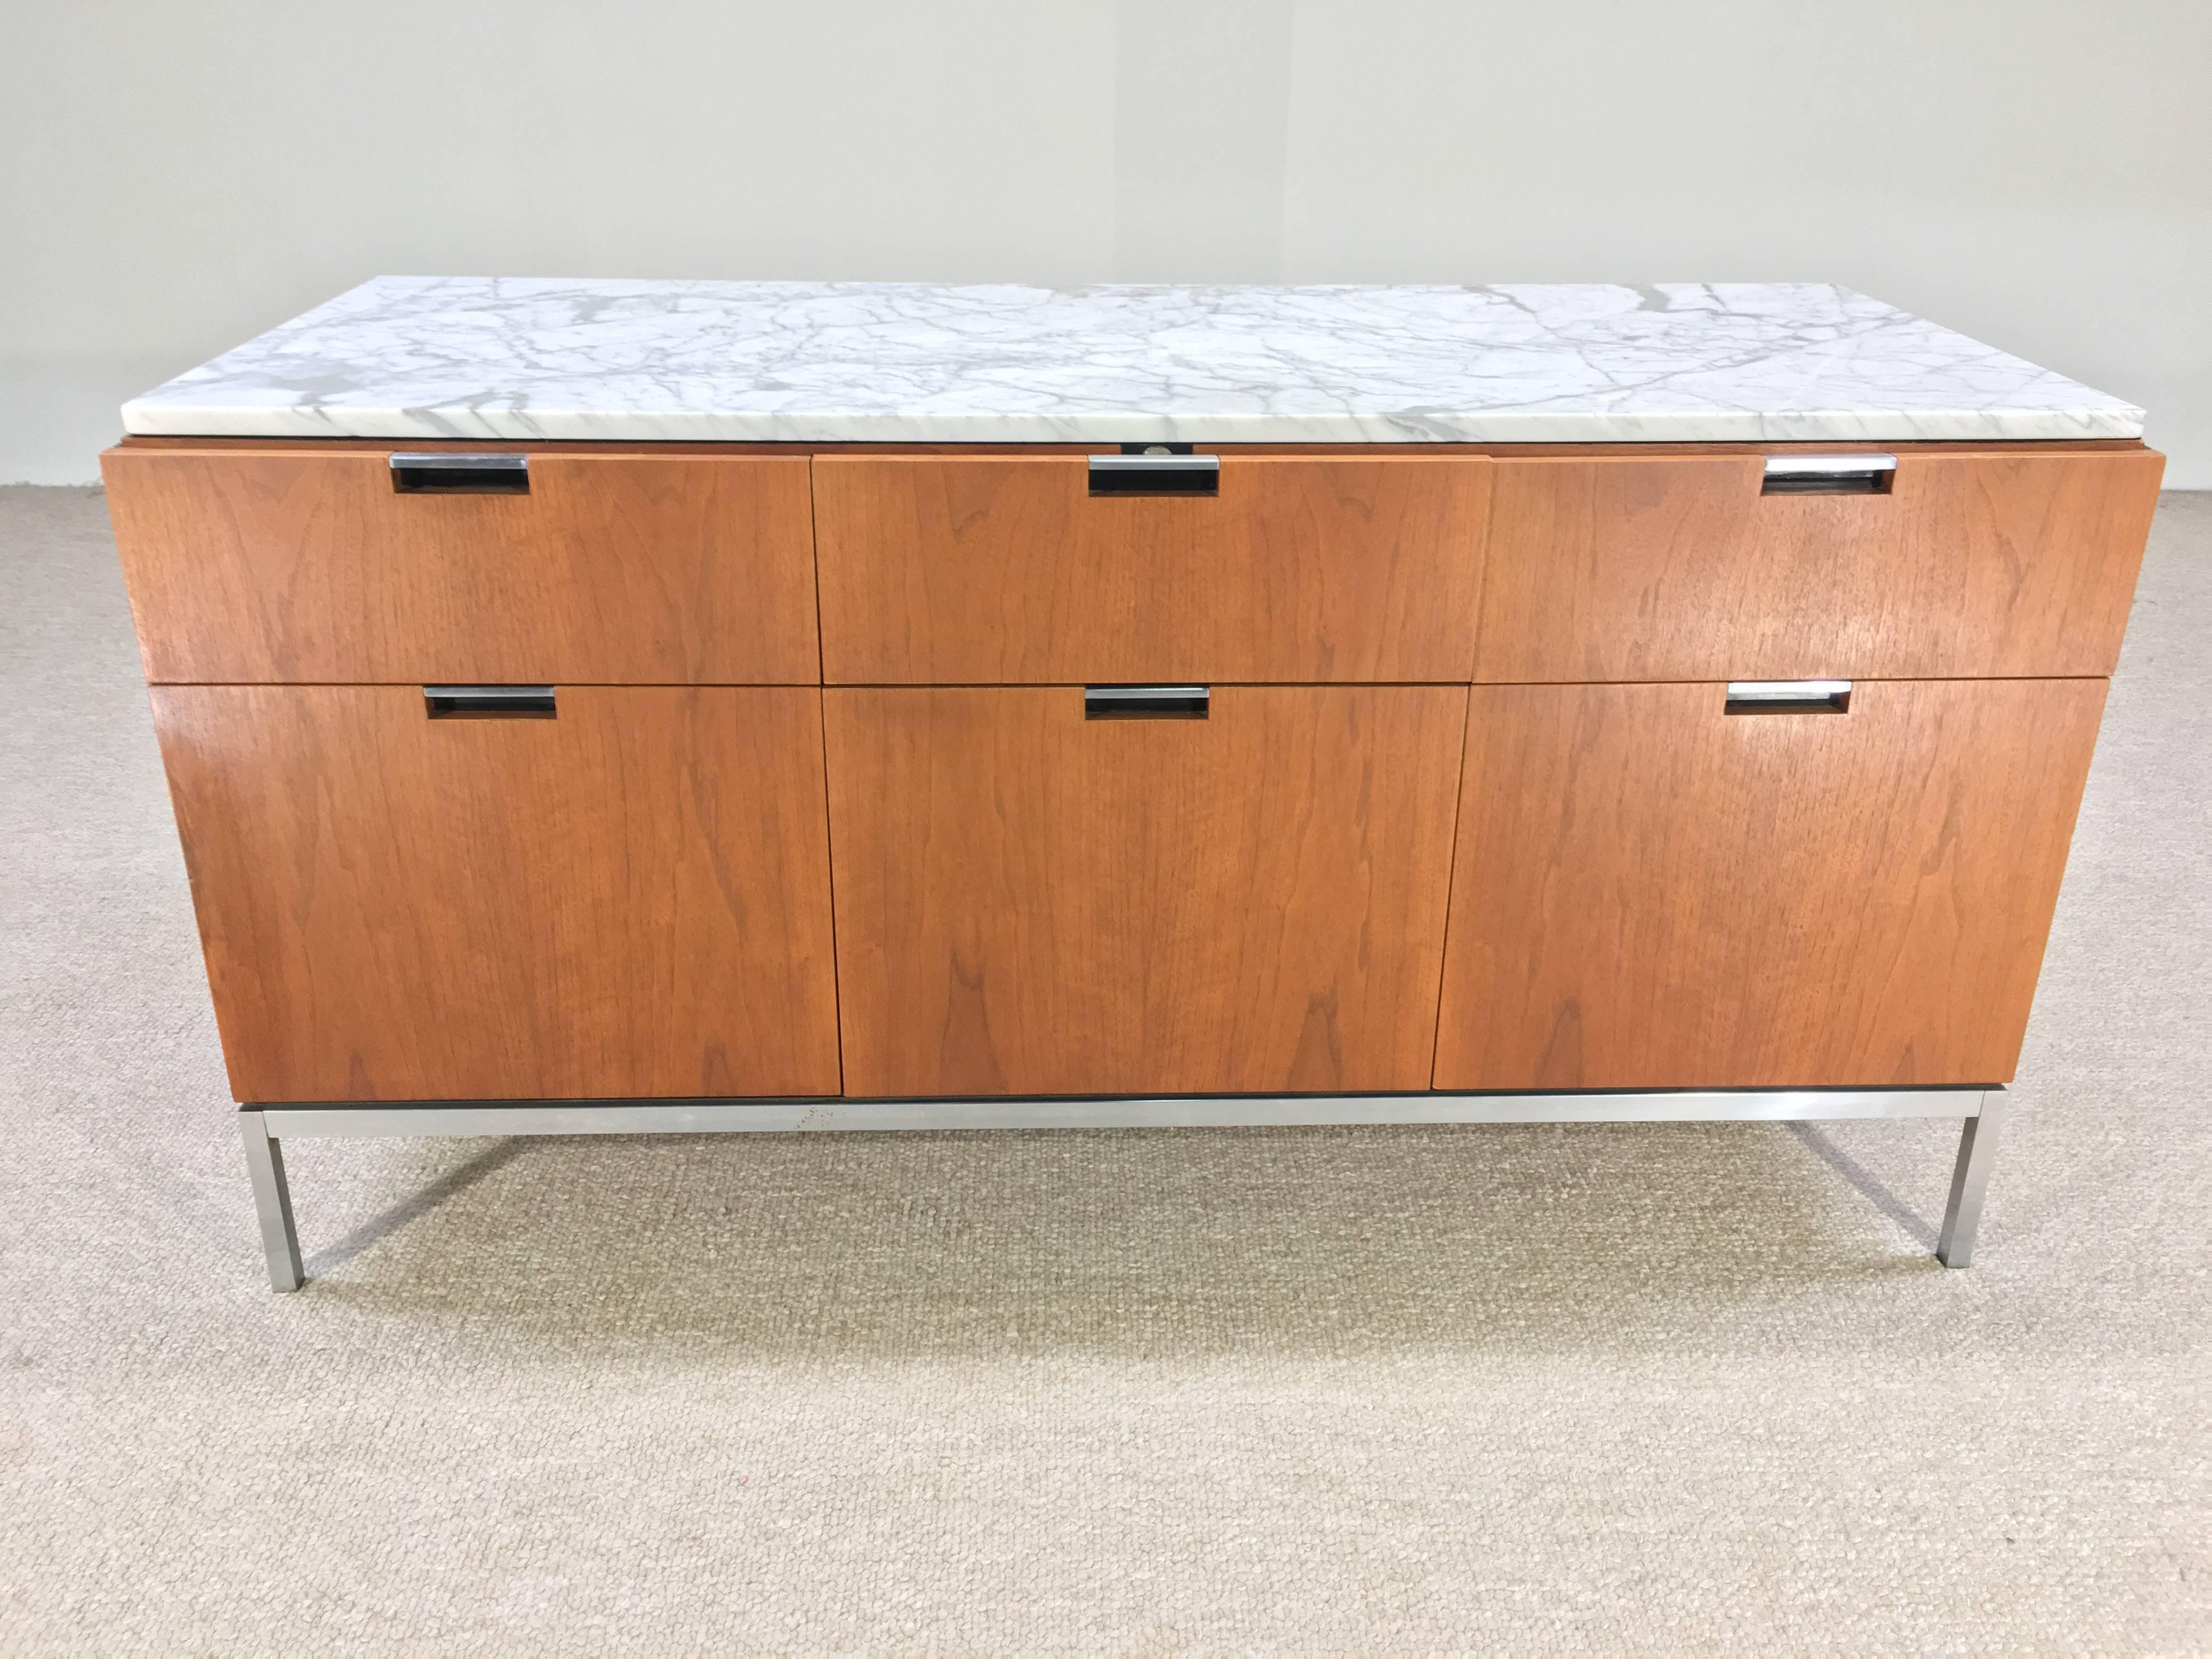 An elegant example of Florence Knoll design. This six-drawer chest features a Carrara marble top, teak case and ample storage.
We have three of these in teak if you need to make a set.